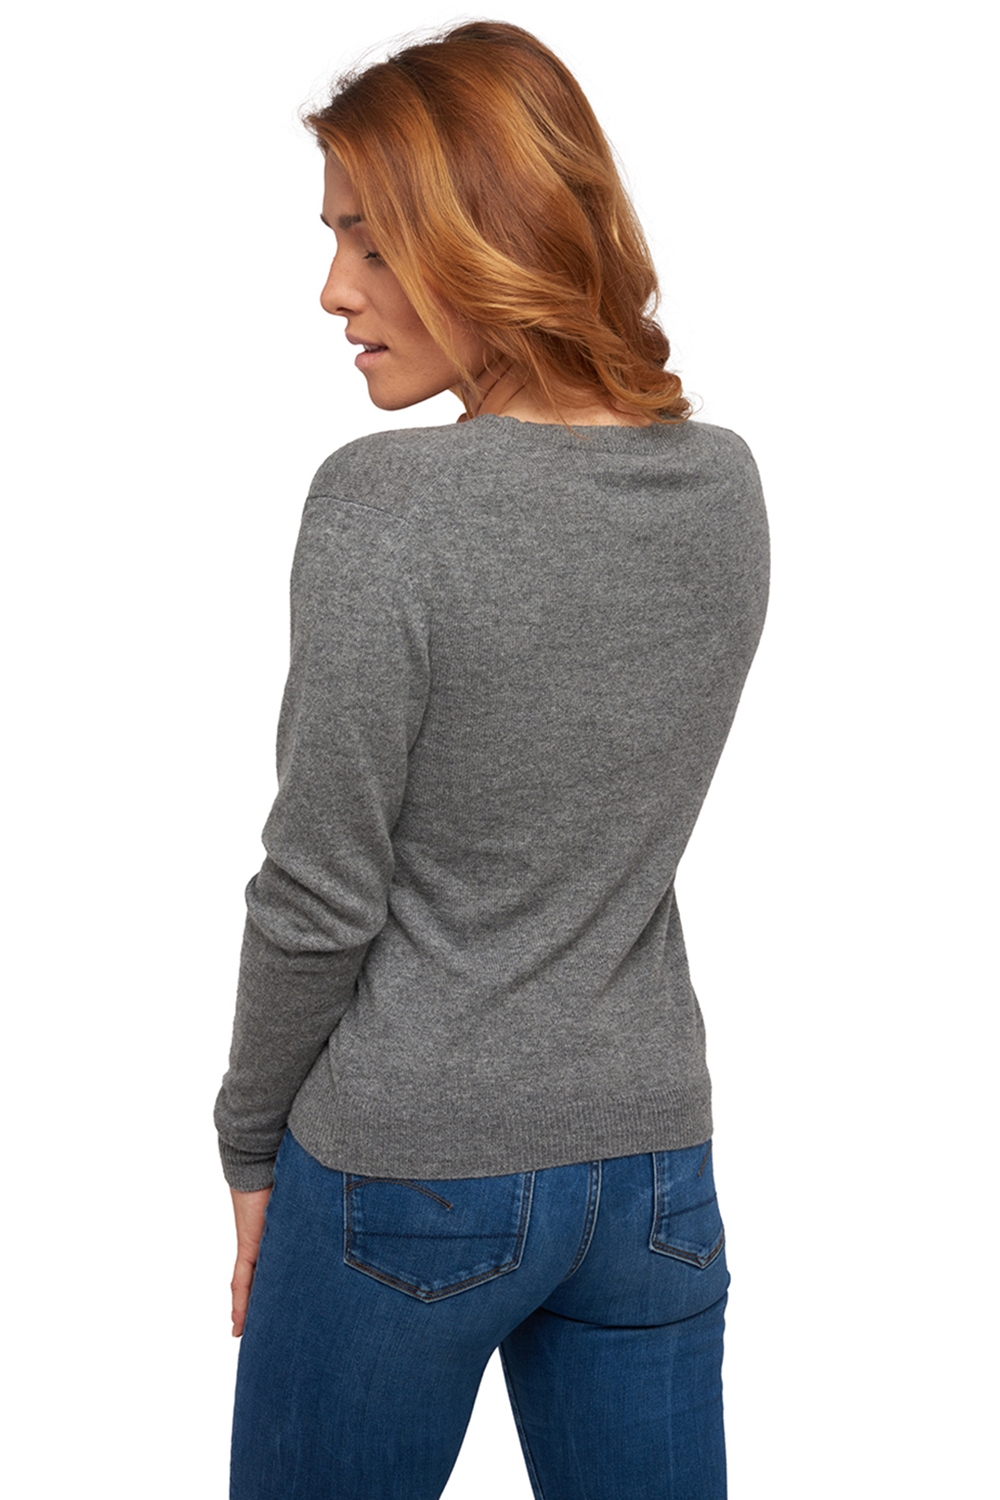 Cashmere ladies basic sweaters at low prices taline grey marl m